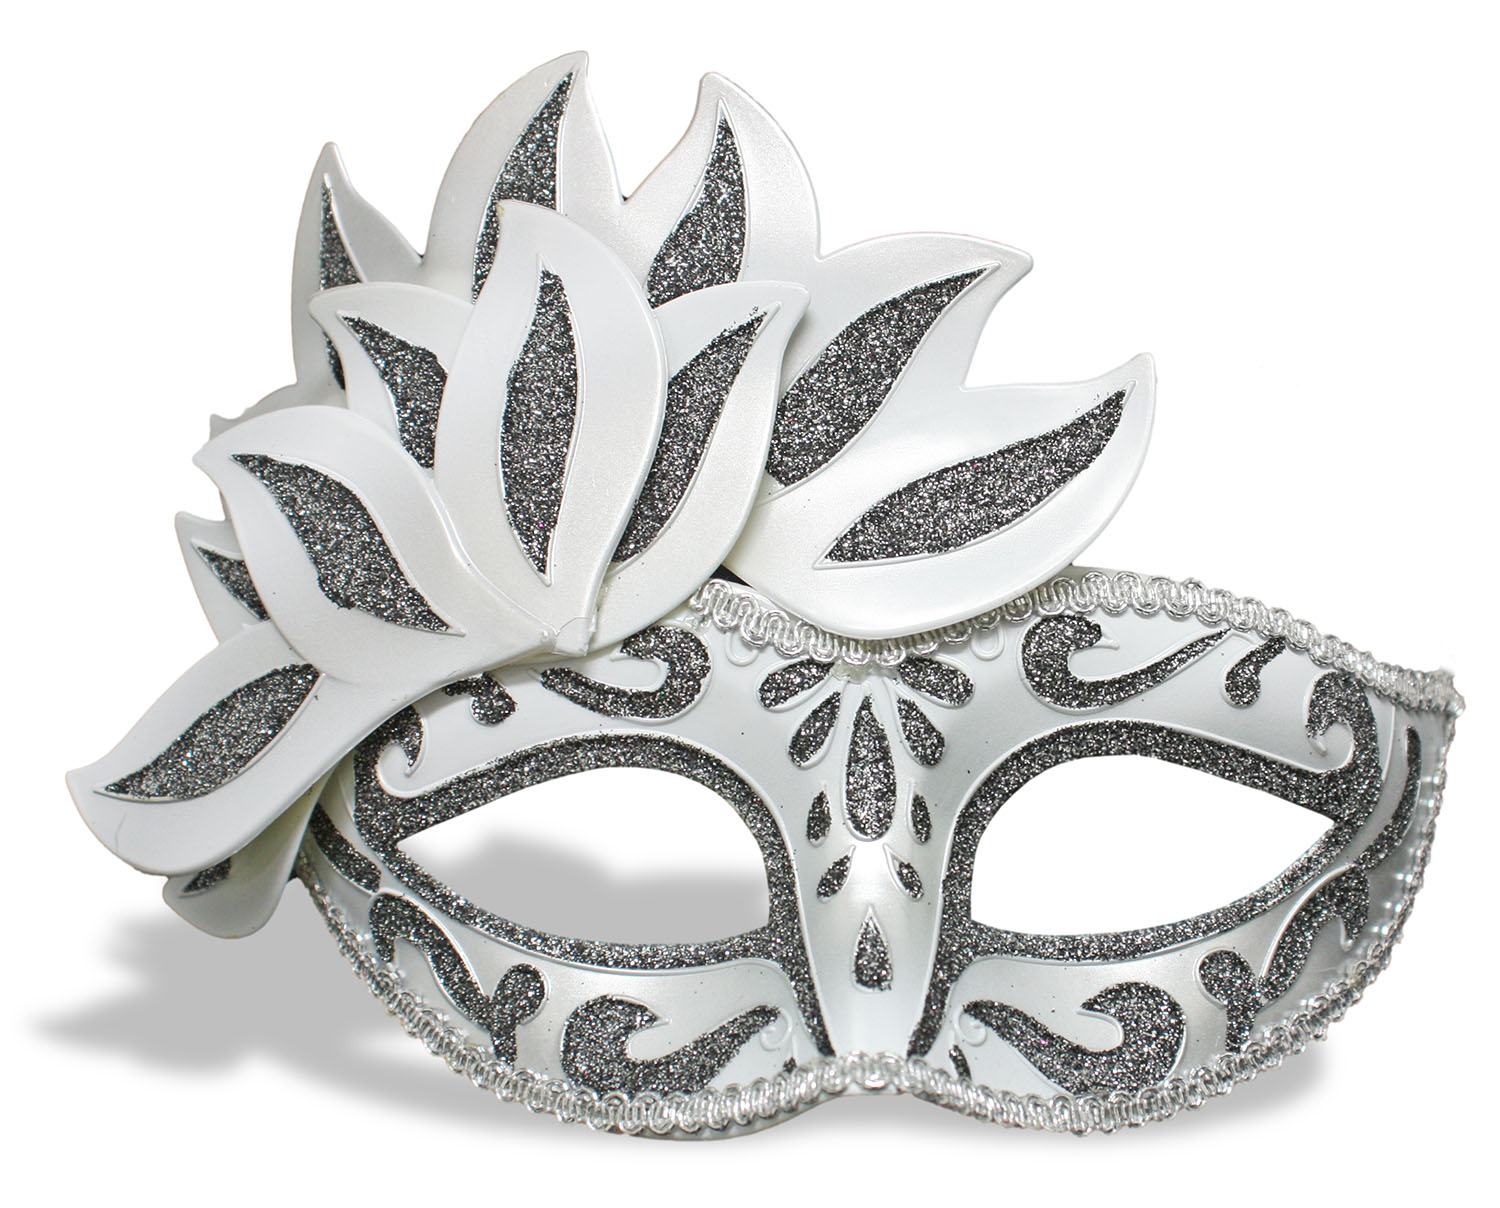 MASQUERADE MASK -  CARNIVAL MASK WITH LACE - BLACK AND WHITE